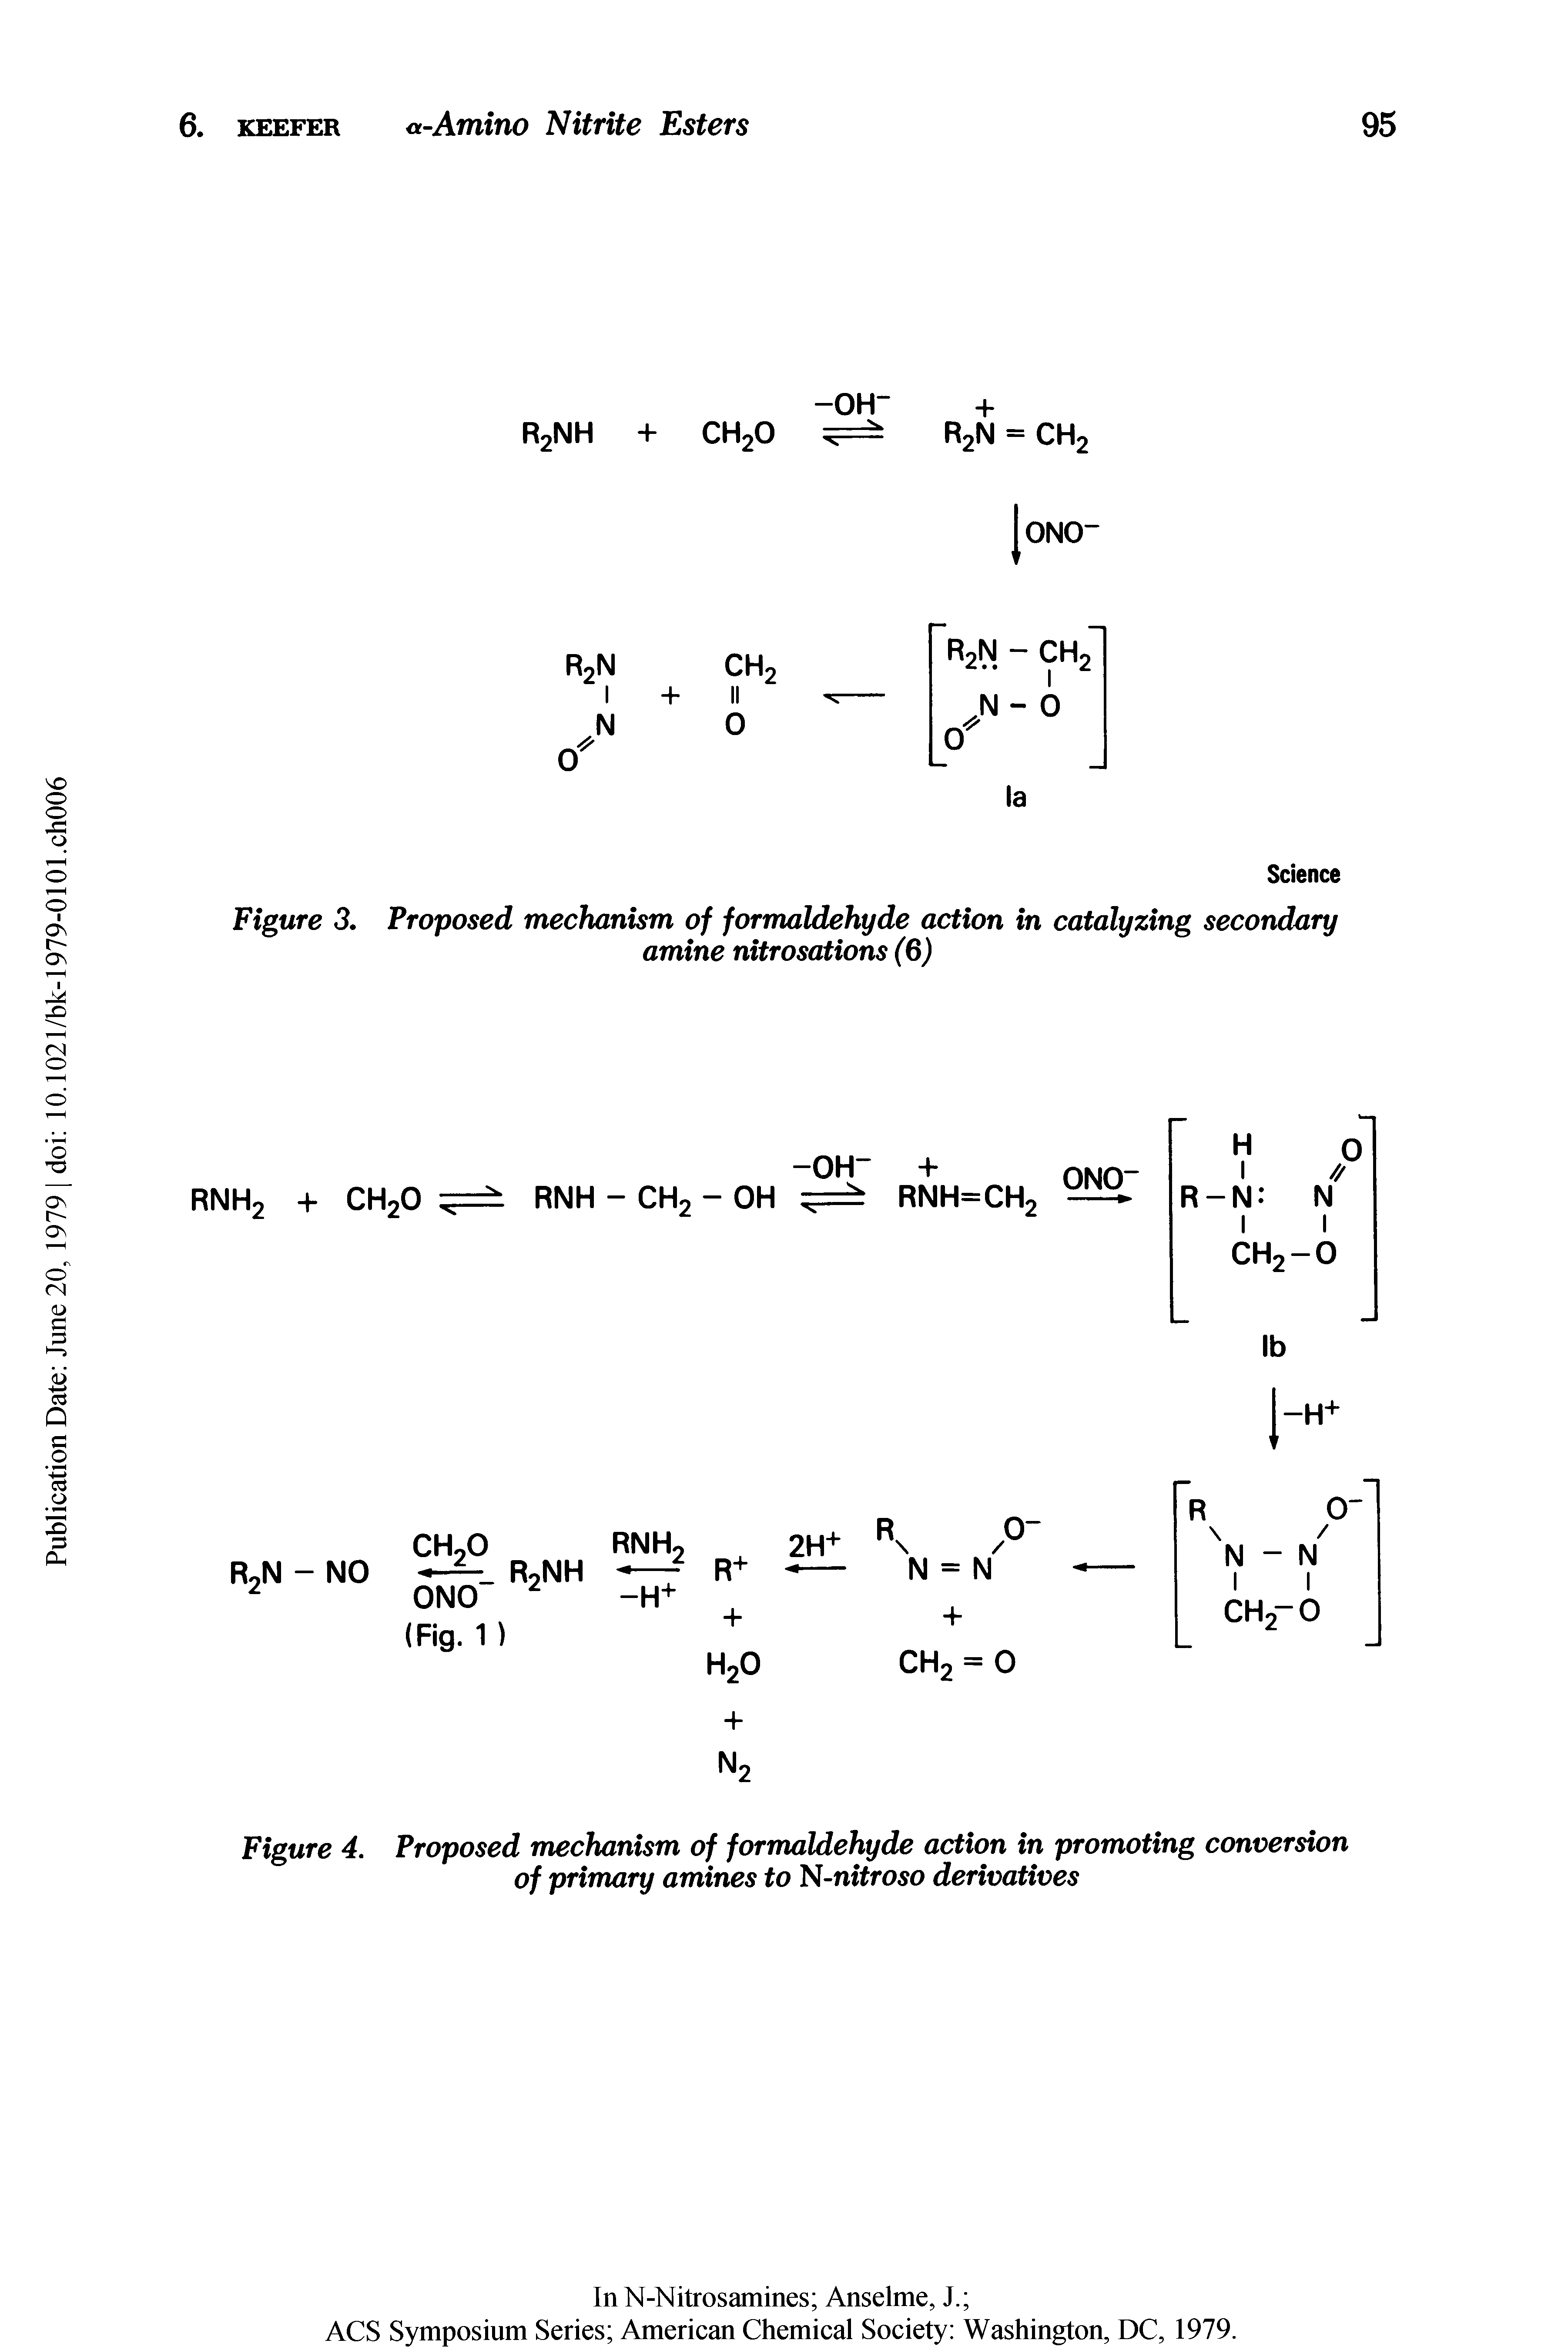 Figure 4. Proposed mechanism of formaldehyde action in promoting conversion of primary amines to N-nitroso derivatives...